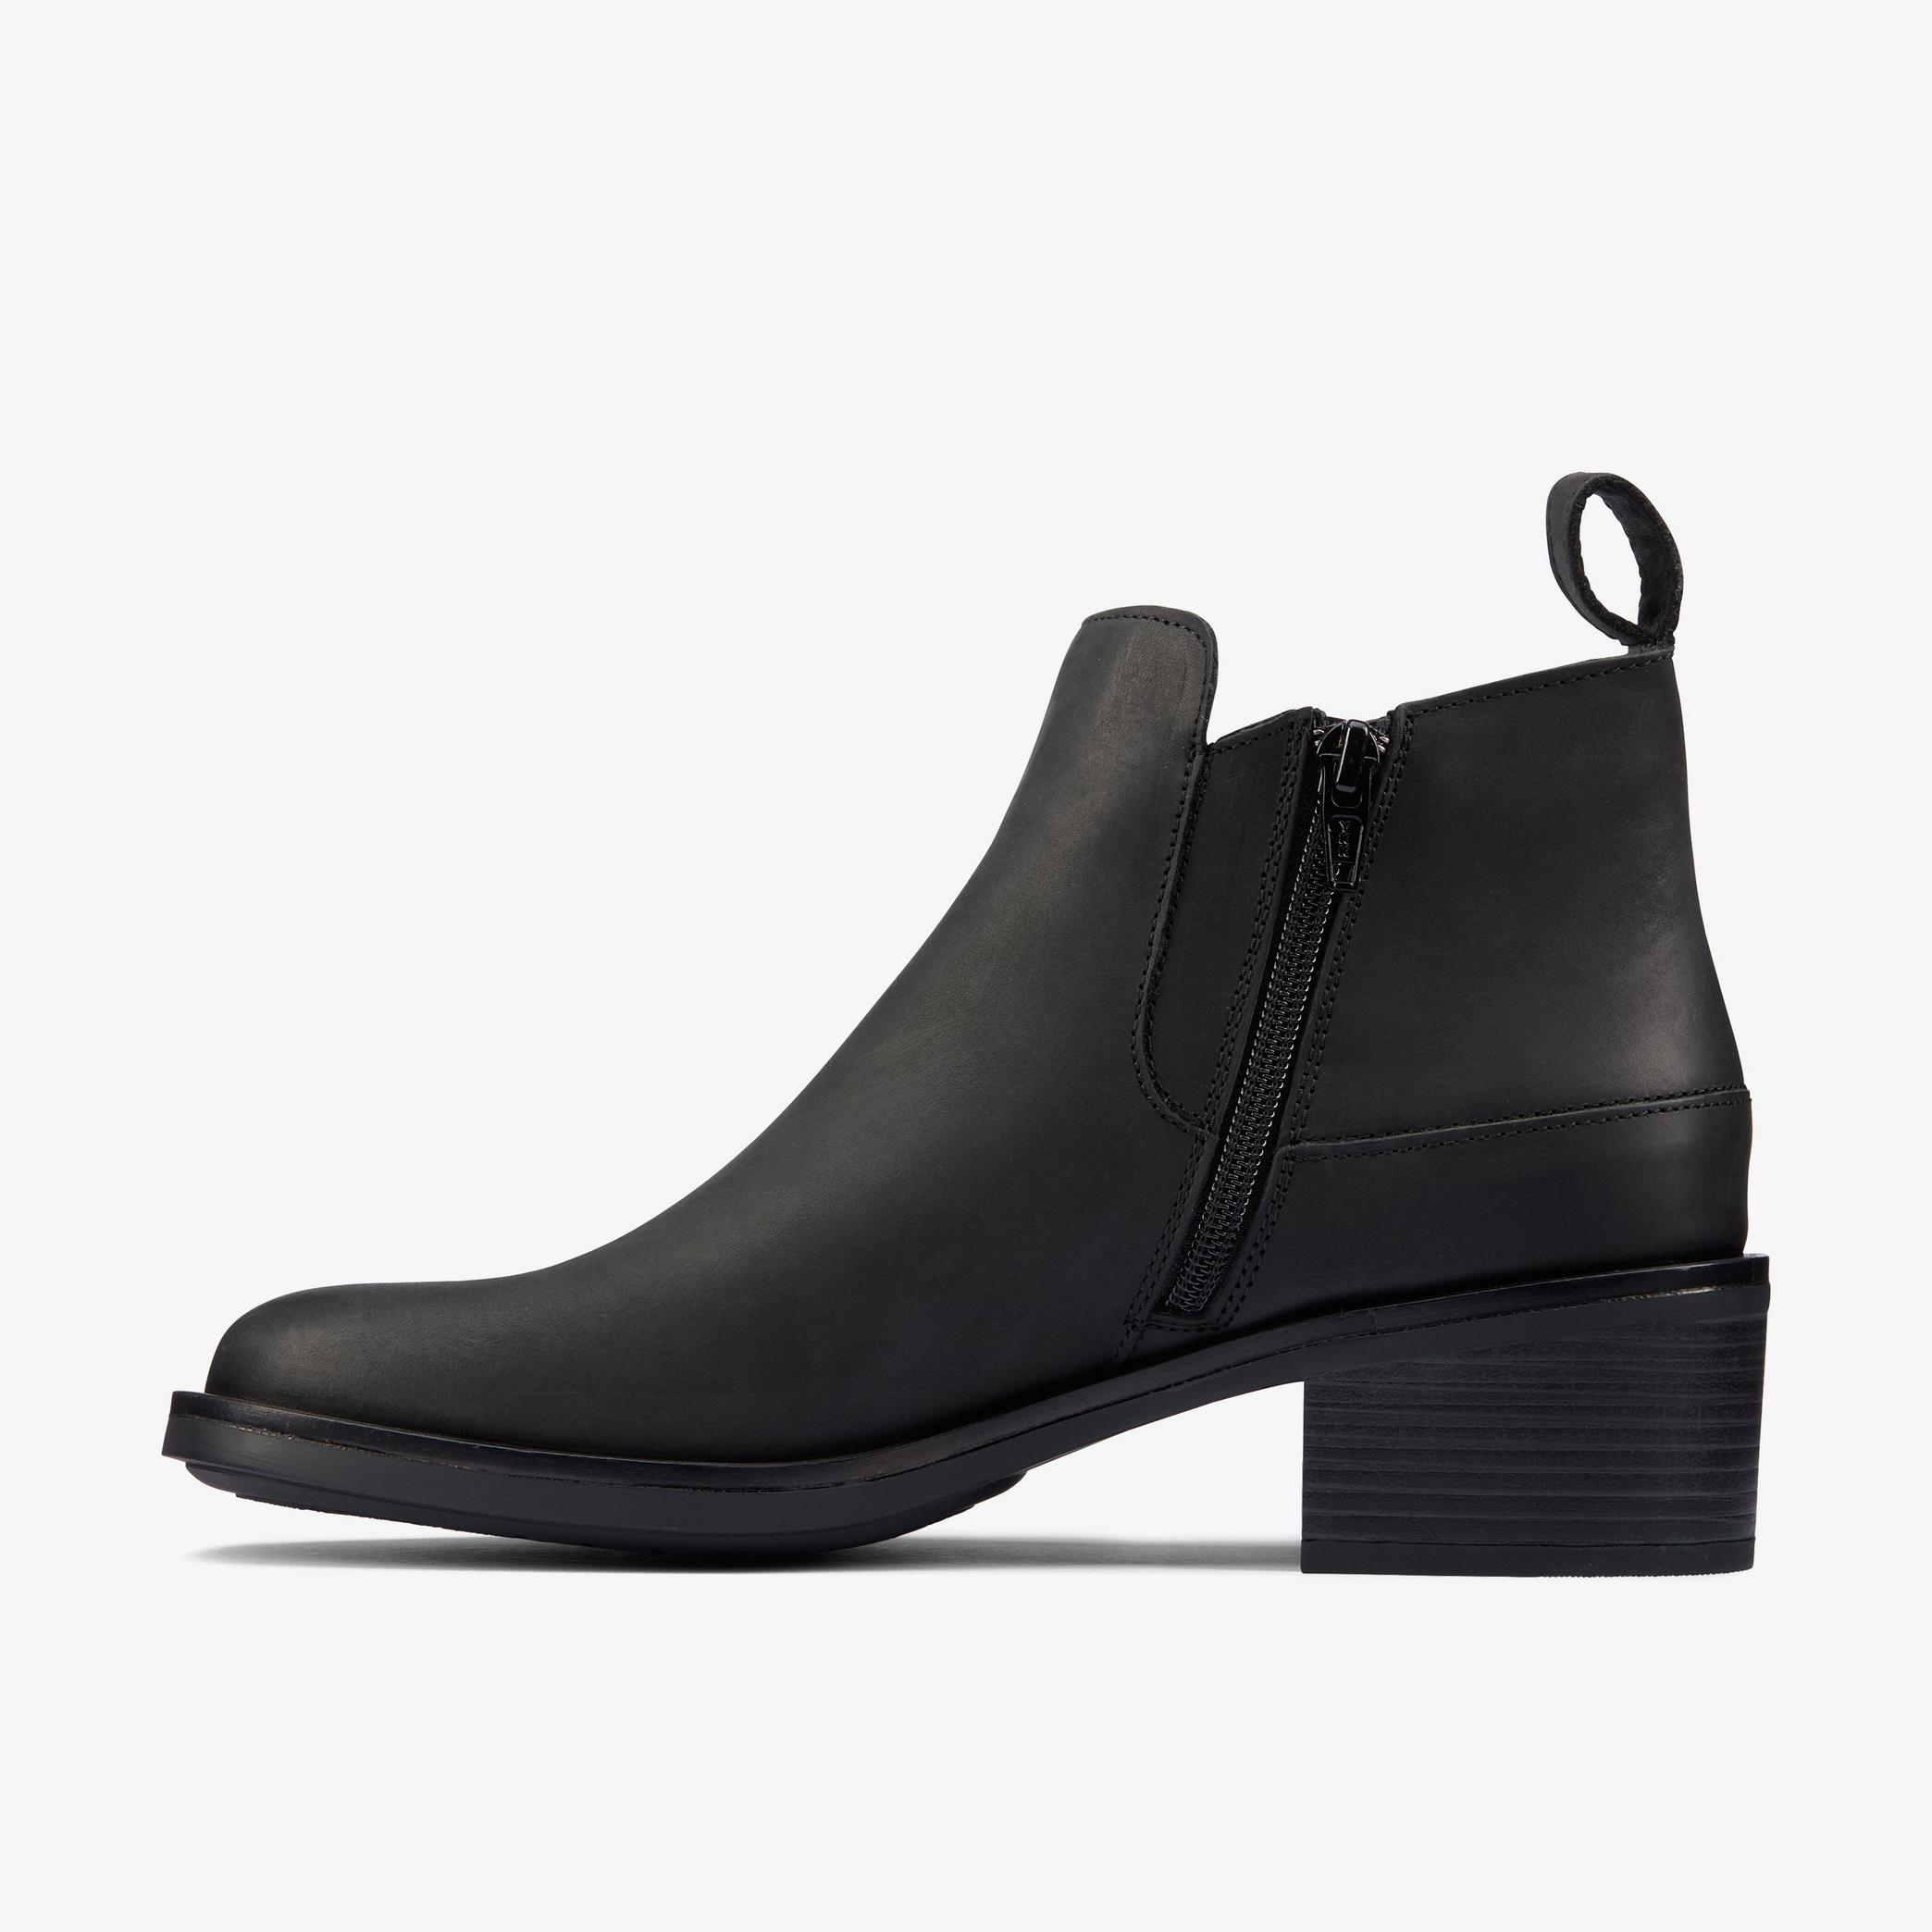 Memi Zip Black Leather Ankle Boots, view 2 of 6